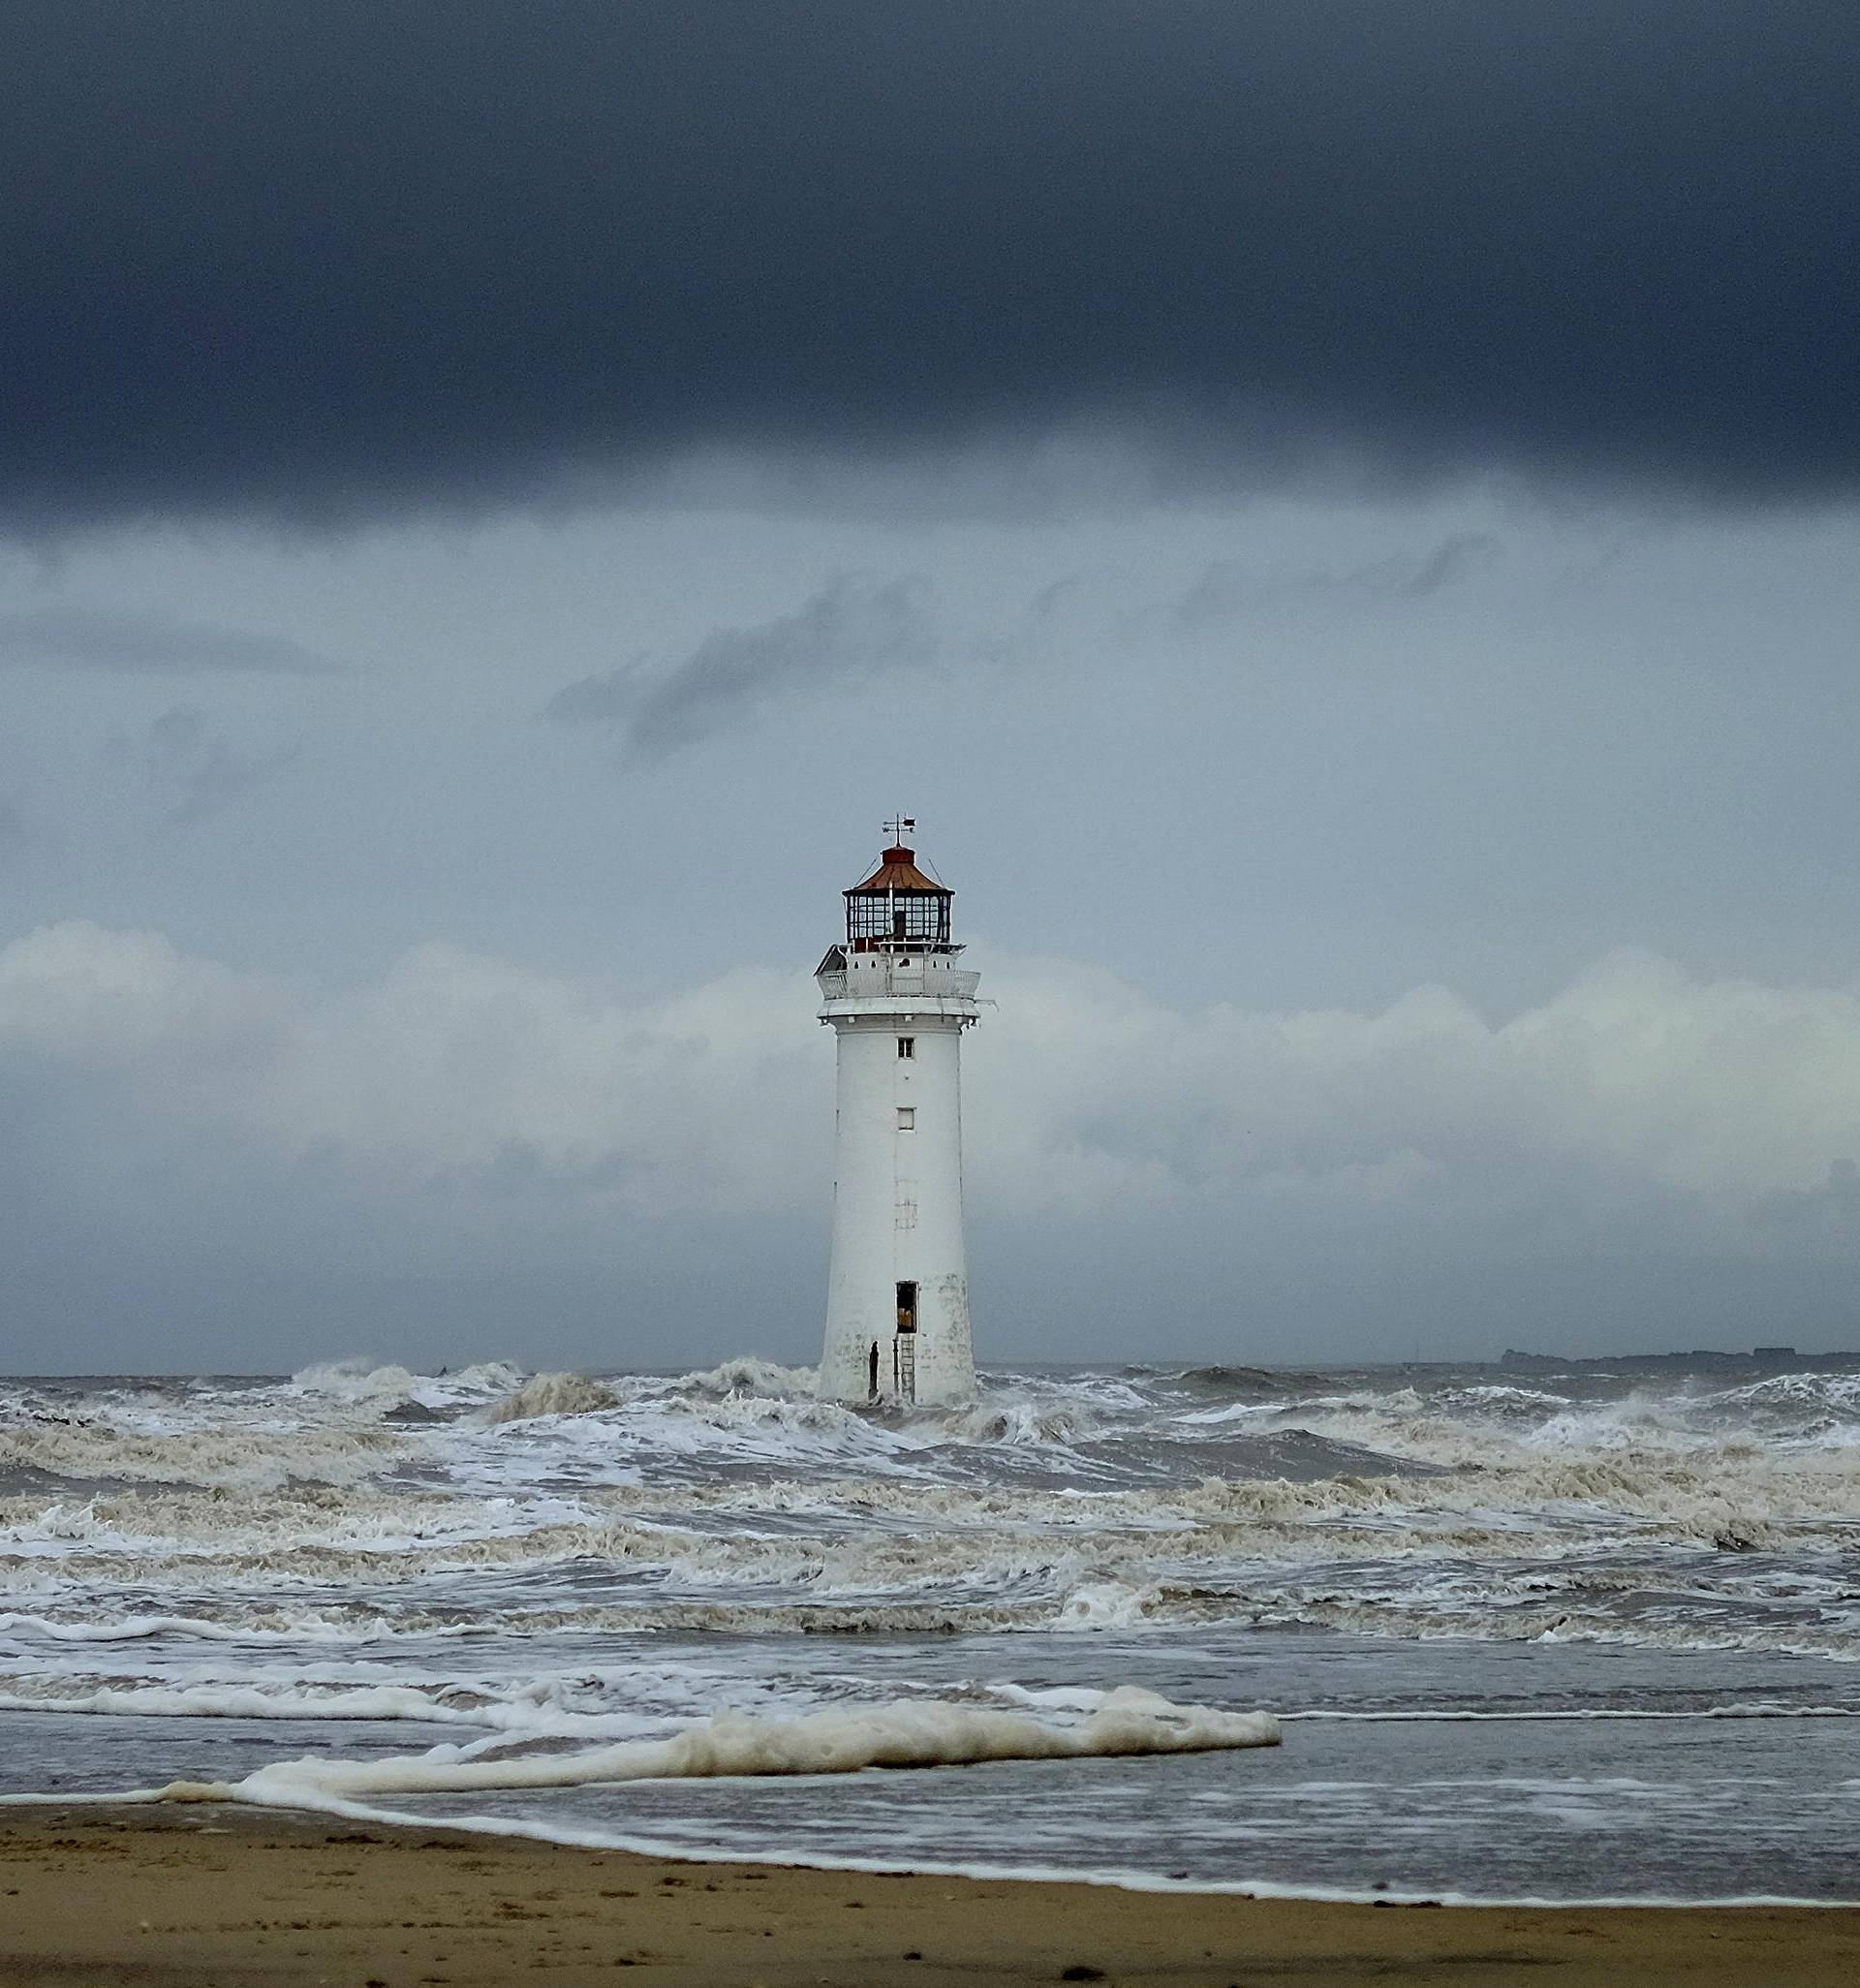 Storm clouds gather above Perch Rock lighthouse in New Brighton, northern England.